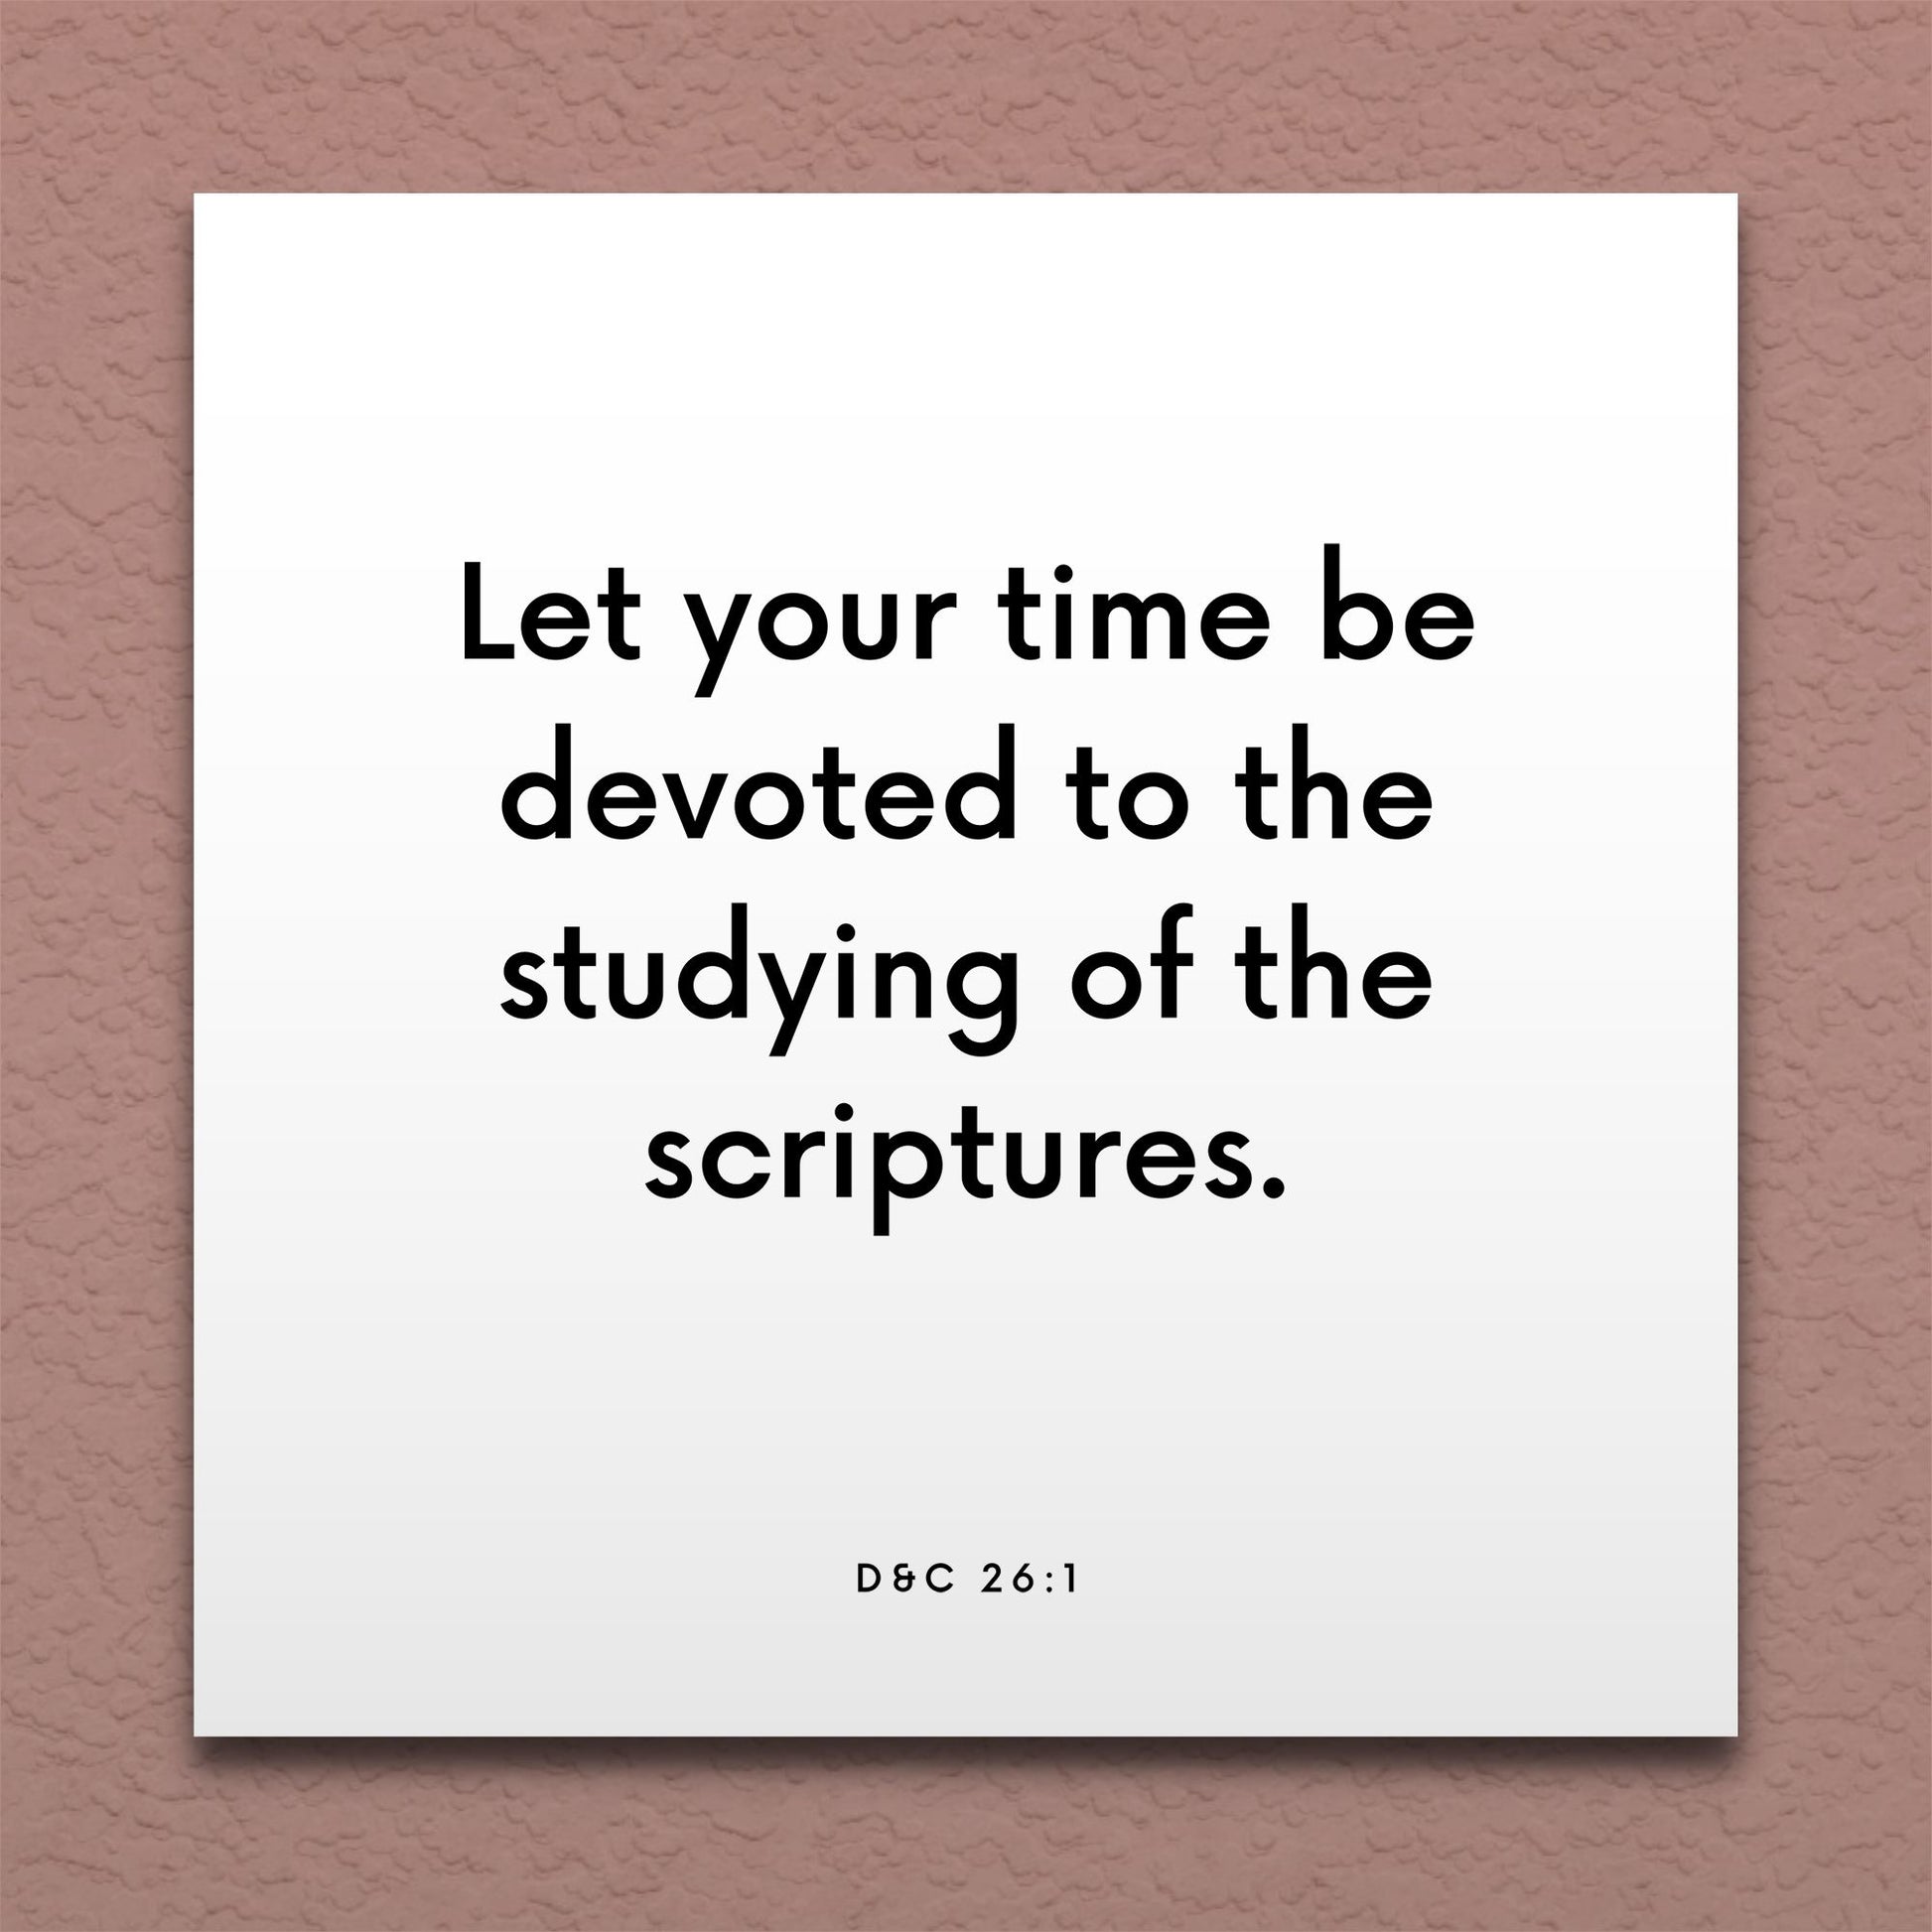 Wall-mounted scripture tile for D&C 26:1 - "Let your time be devoted to the studying of the scriptures"